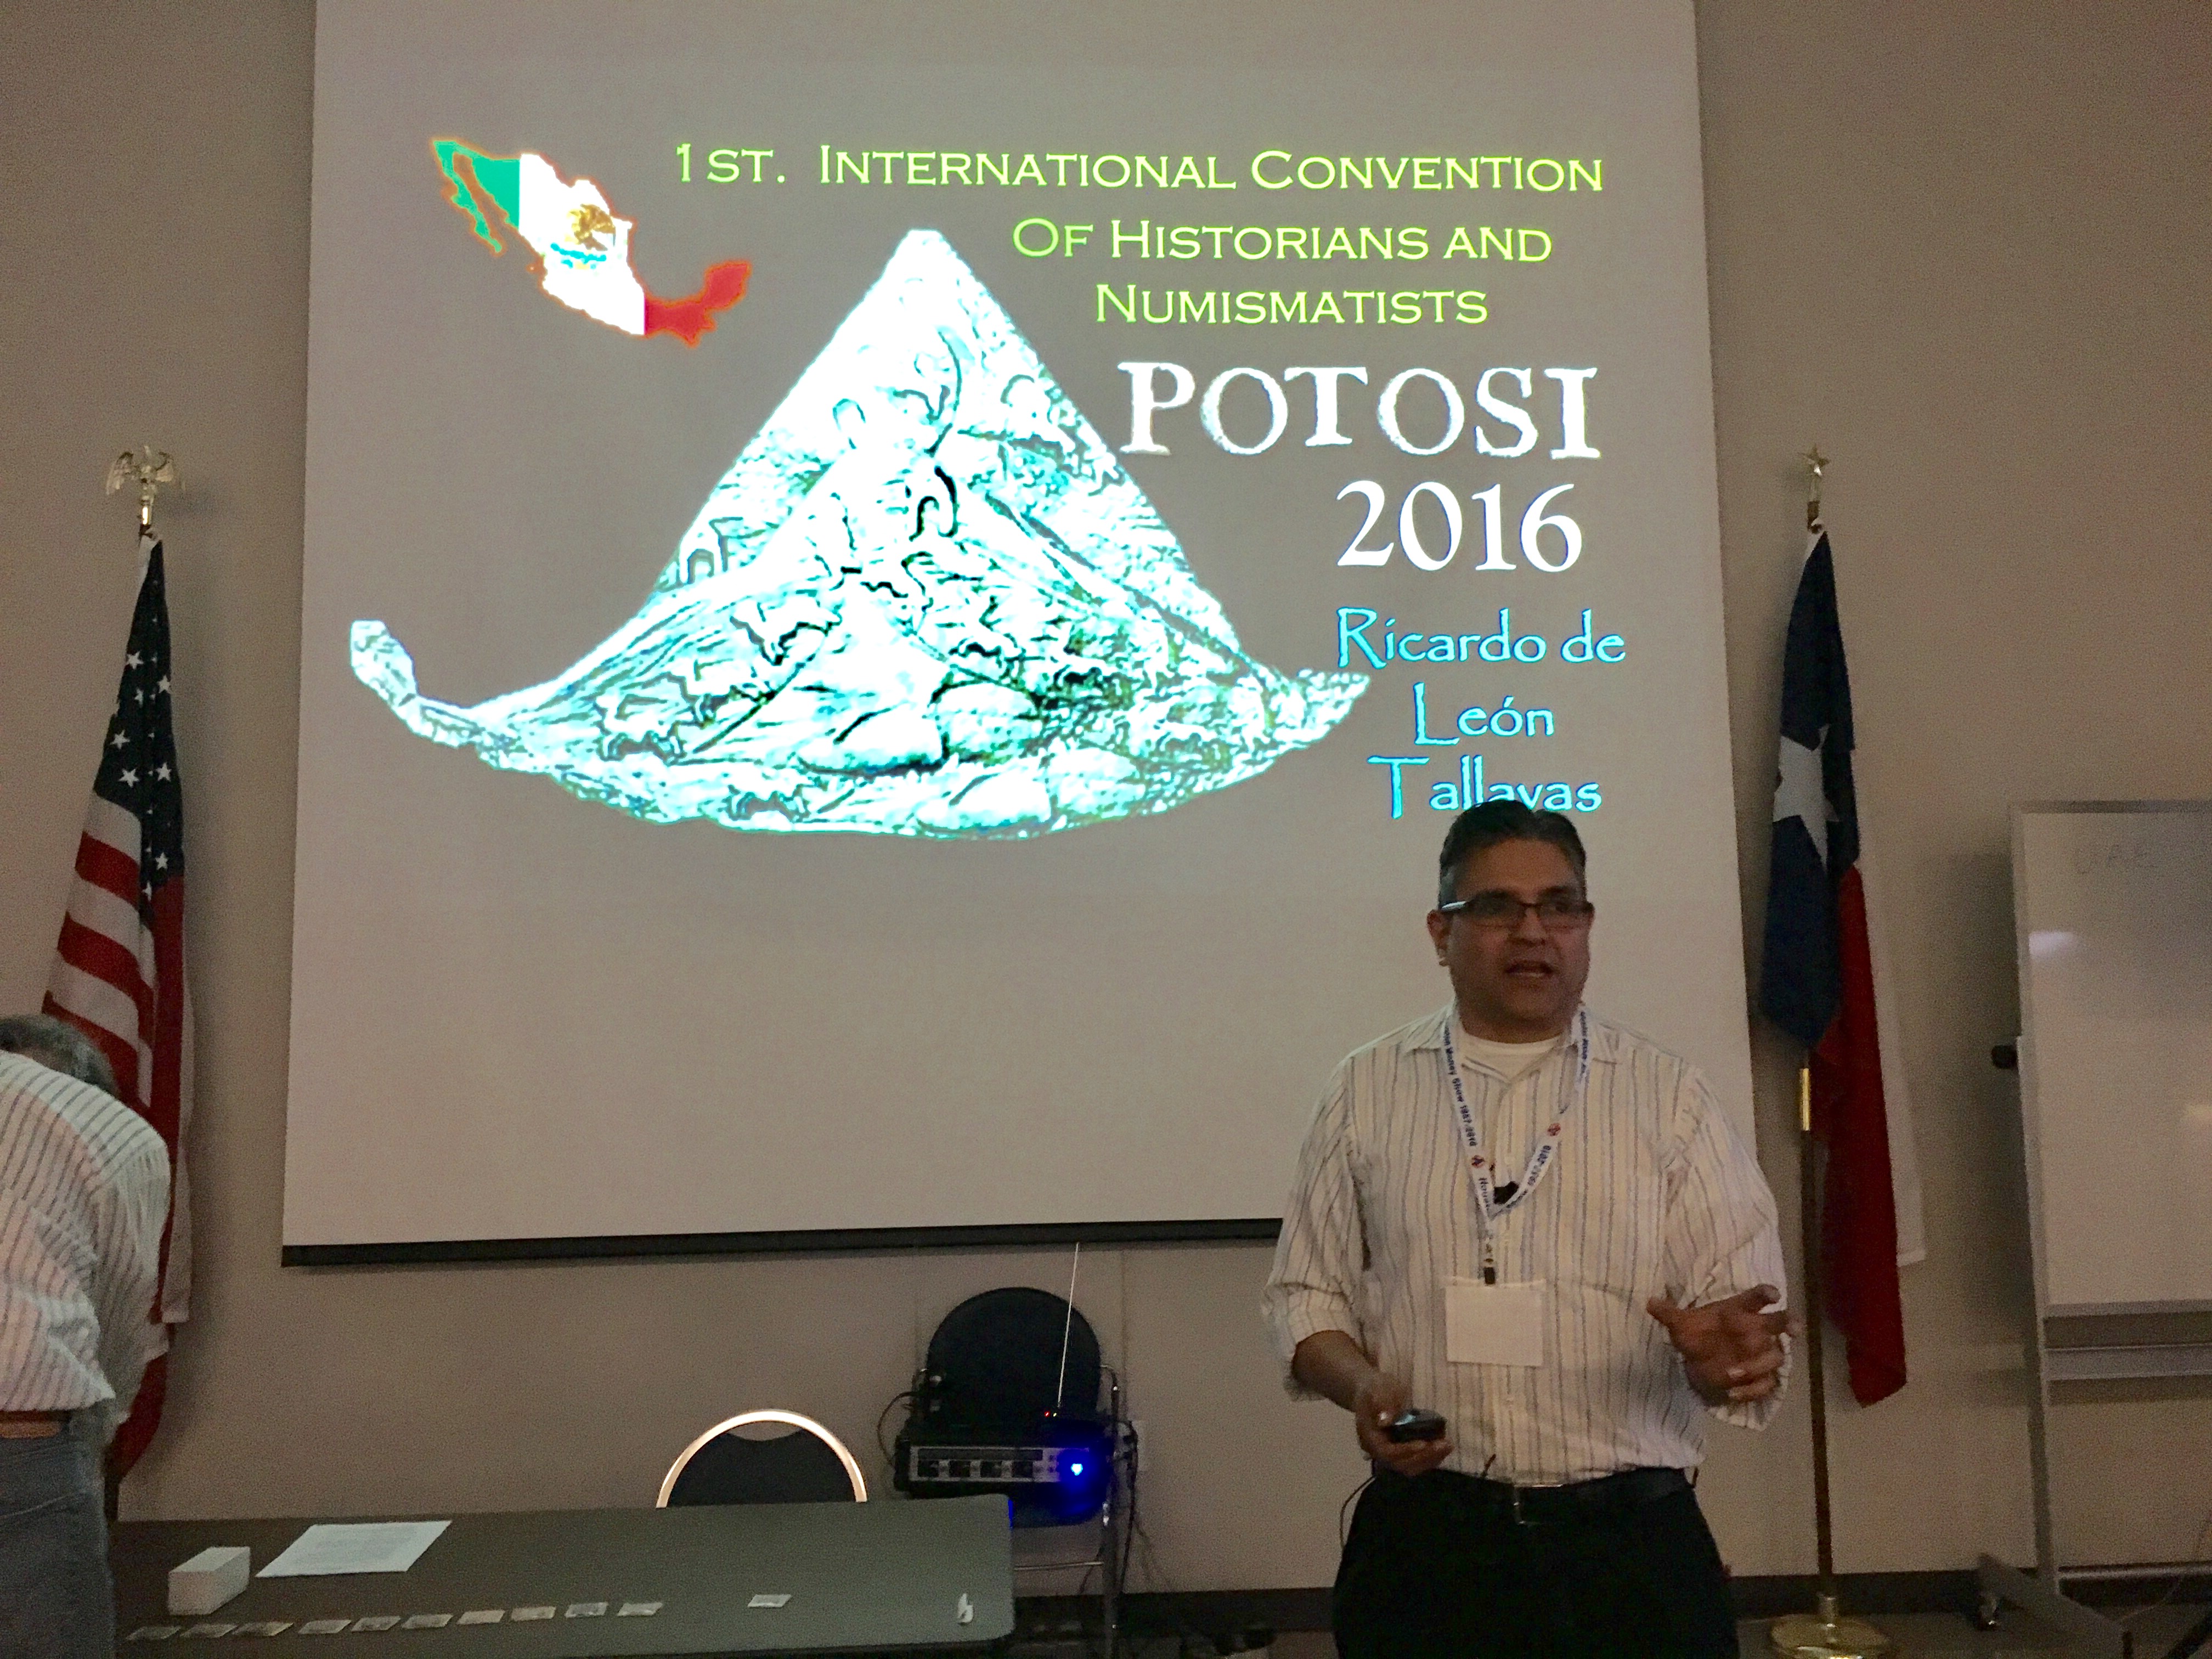 The GHCC's Ricardo de Leon Tallavas gives a presentation about his experiences at the 1st Intl. Convention of Historians & Numismatists at the march 2017 club meeting